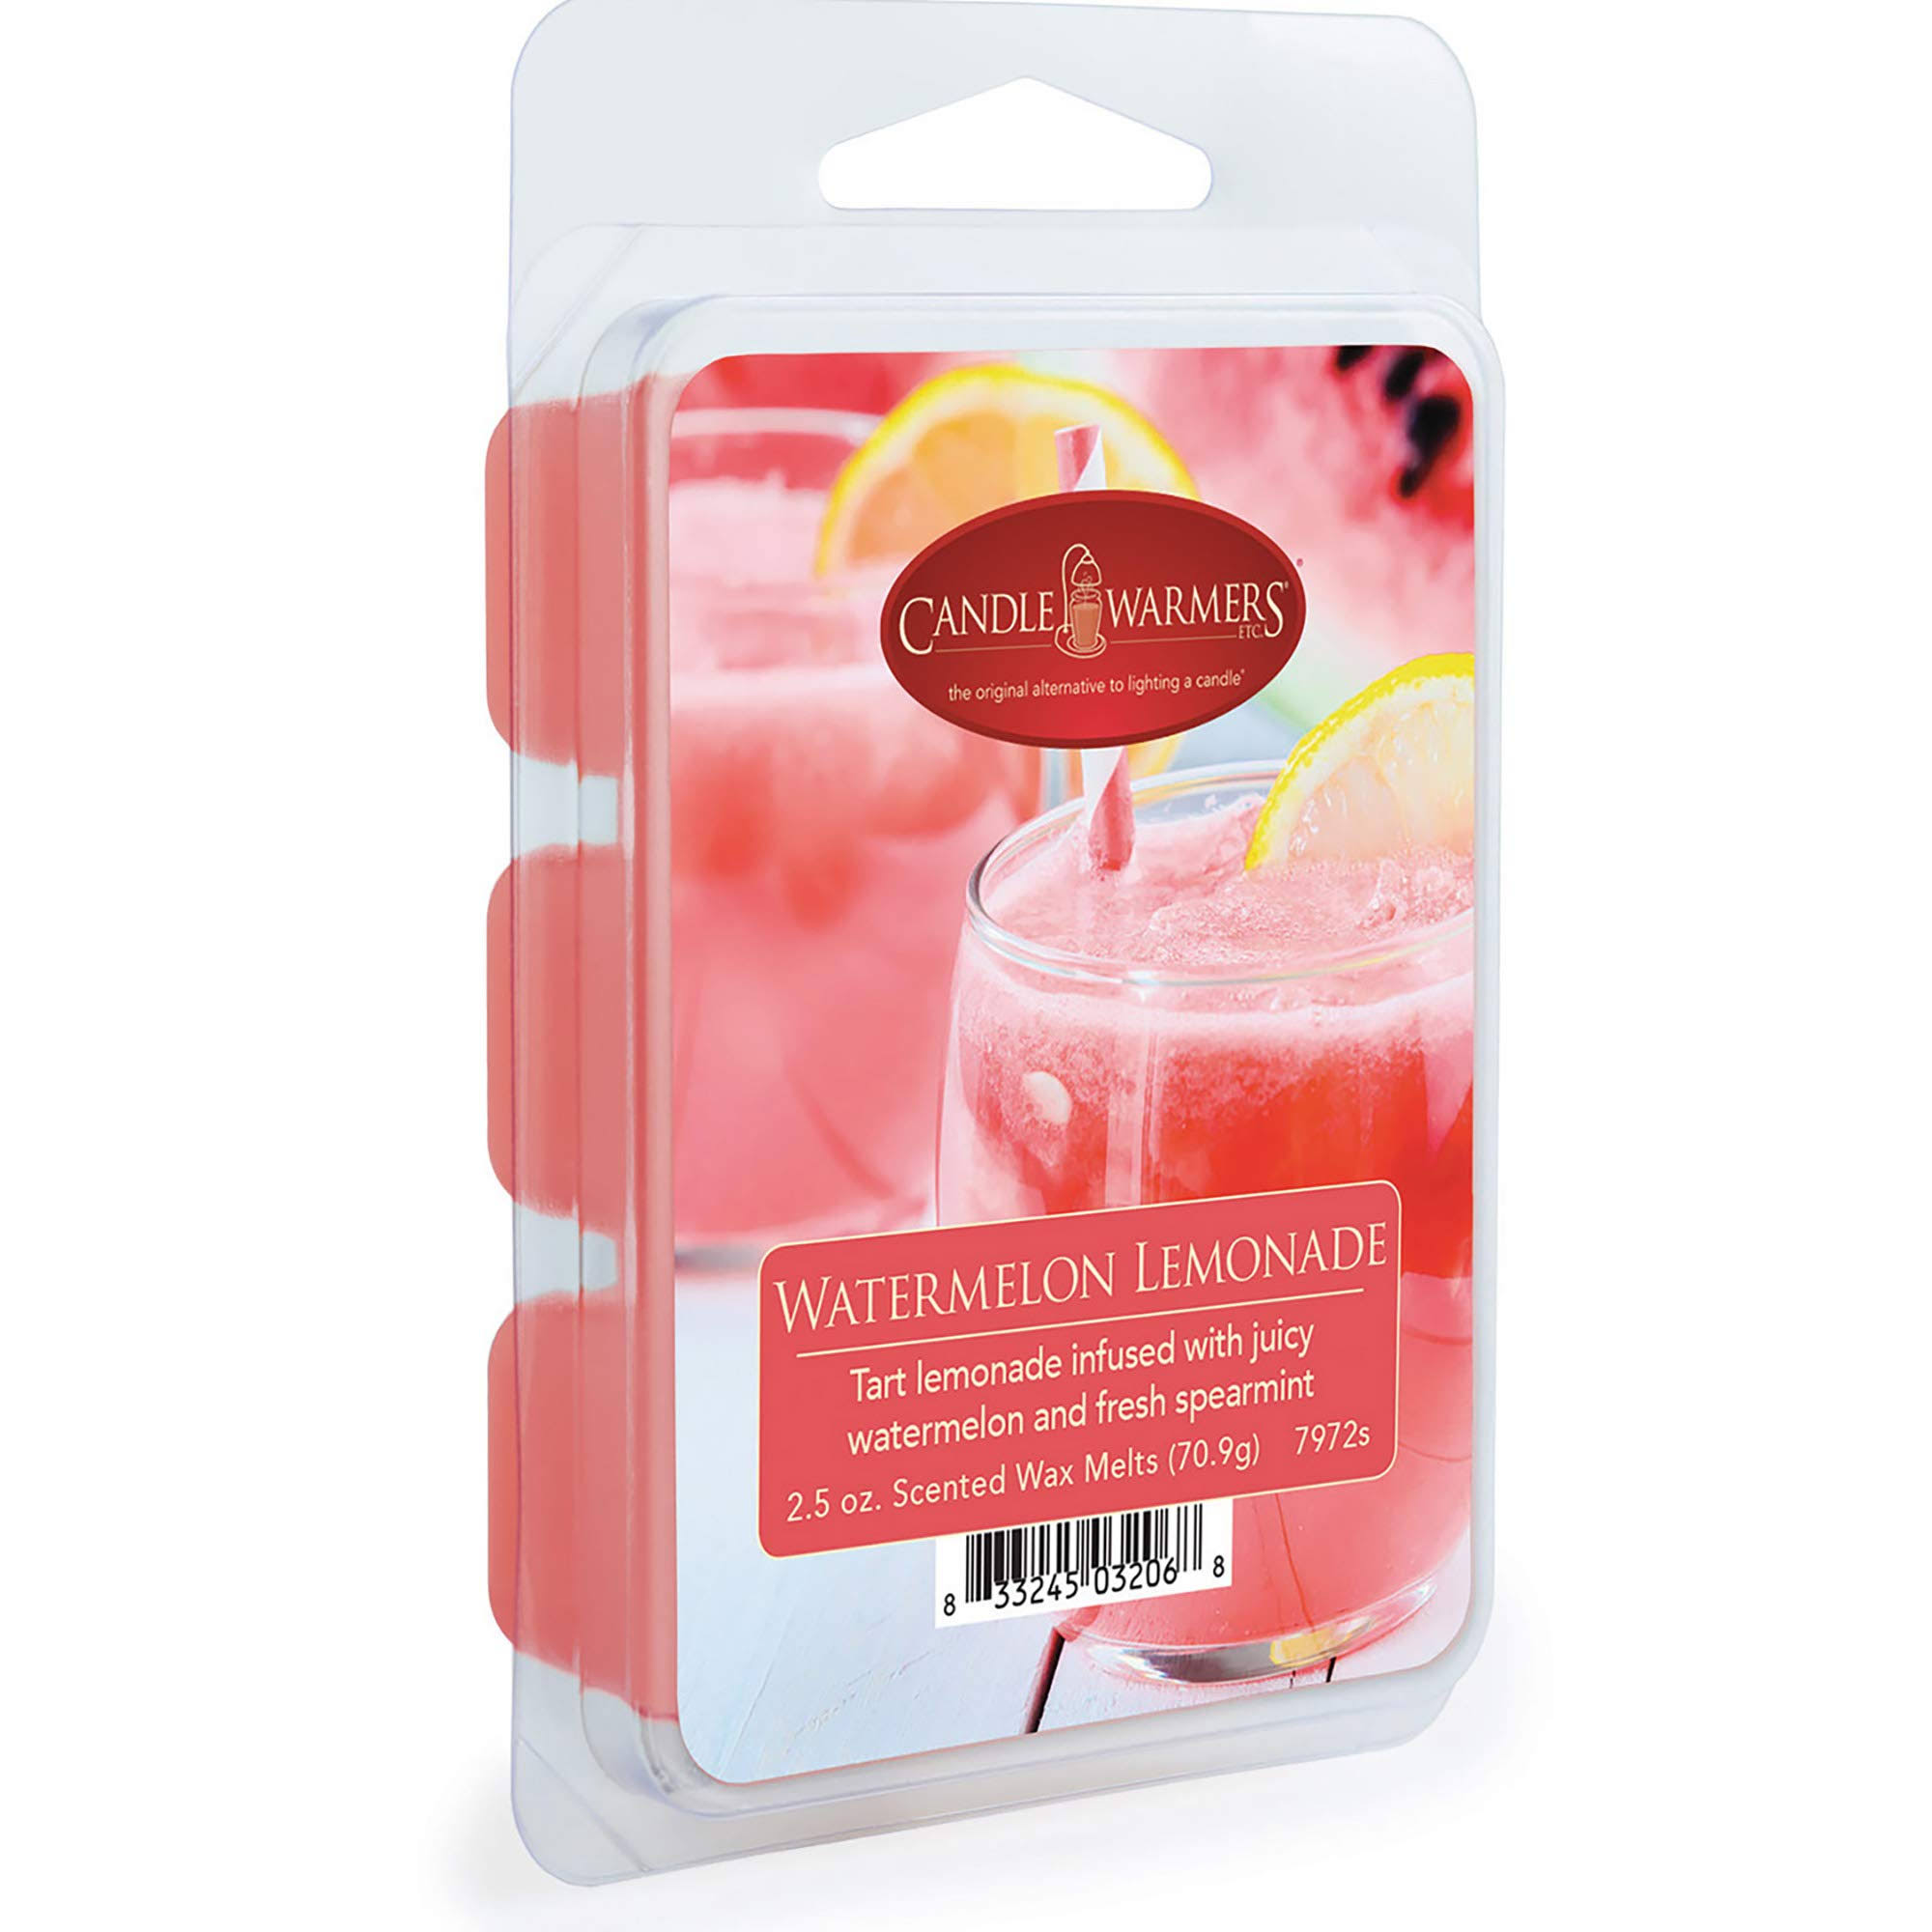 Candle Warmers Scented Wax Melts - Watermelon Lemonade, 2.5oz